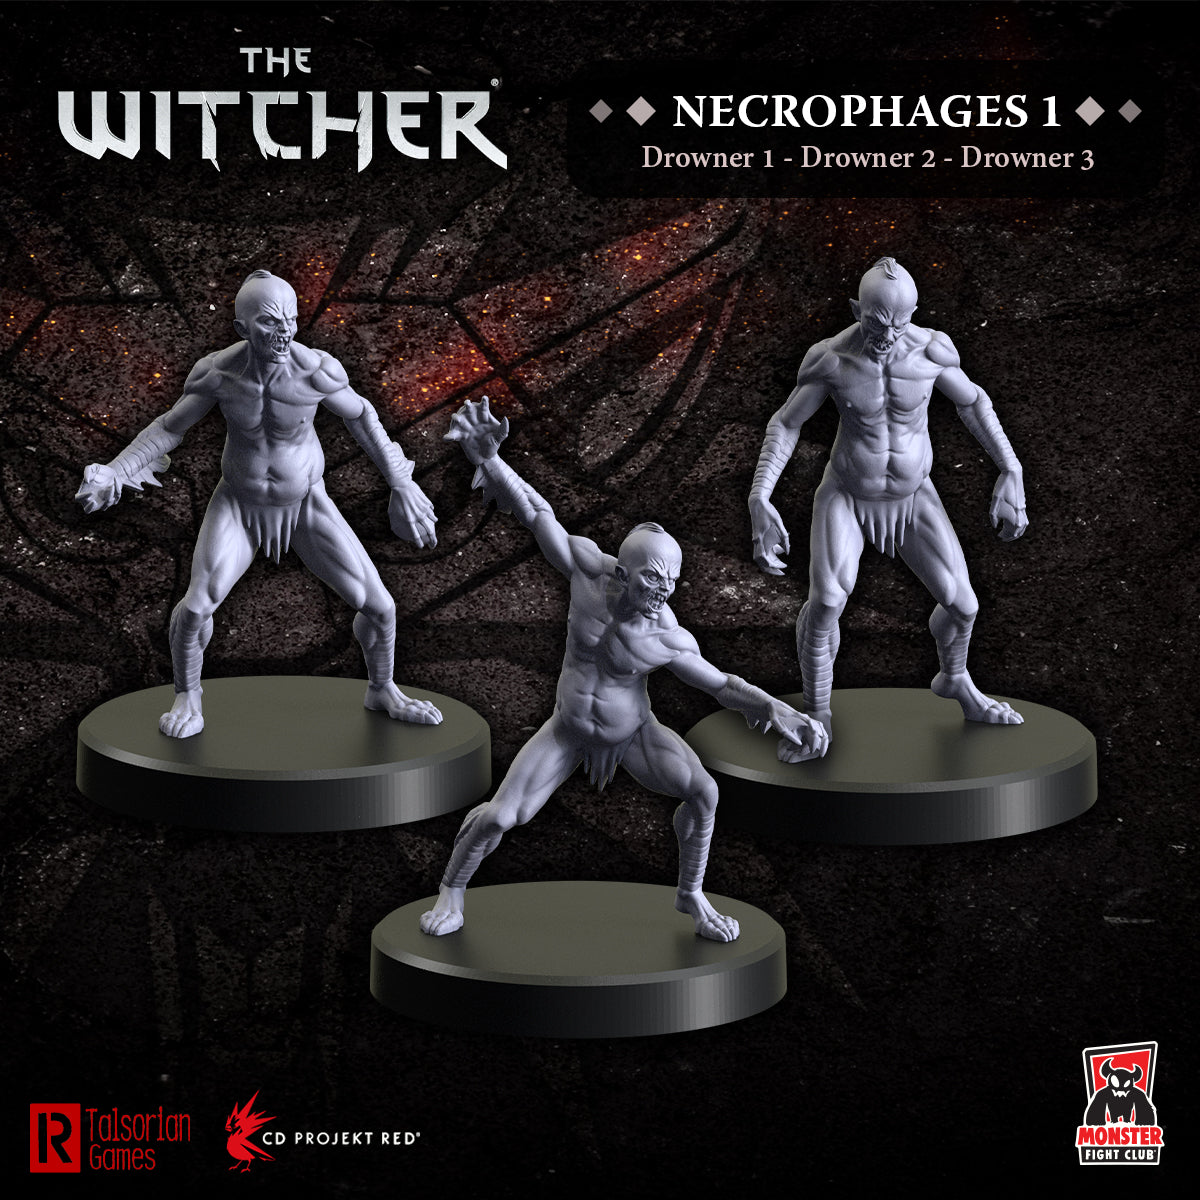 The Witcher - Necrophages 1: Drowners